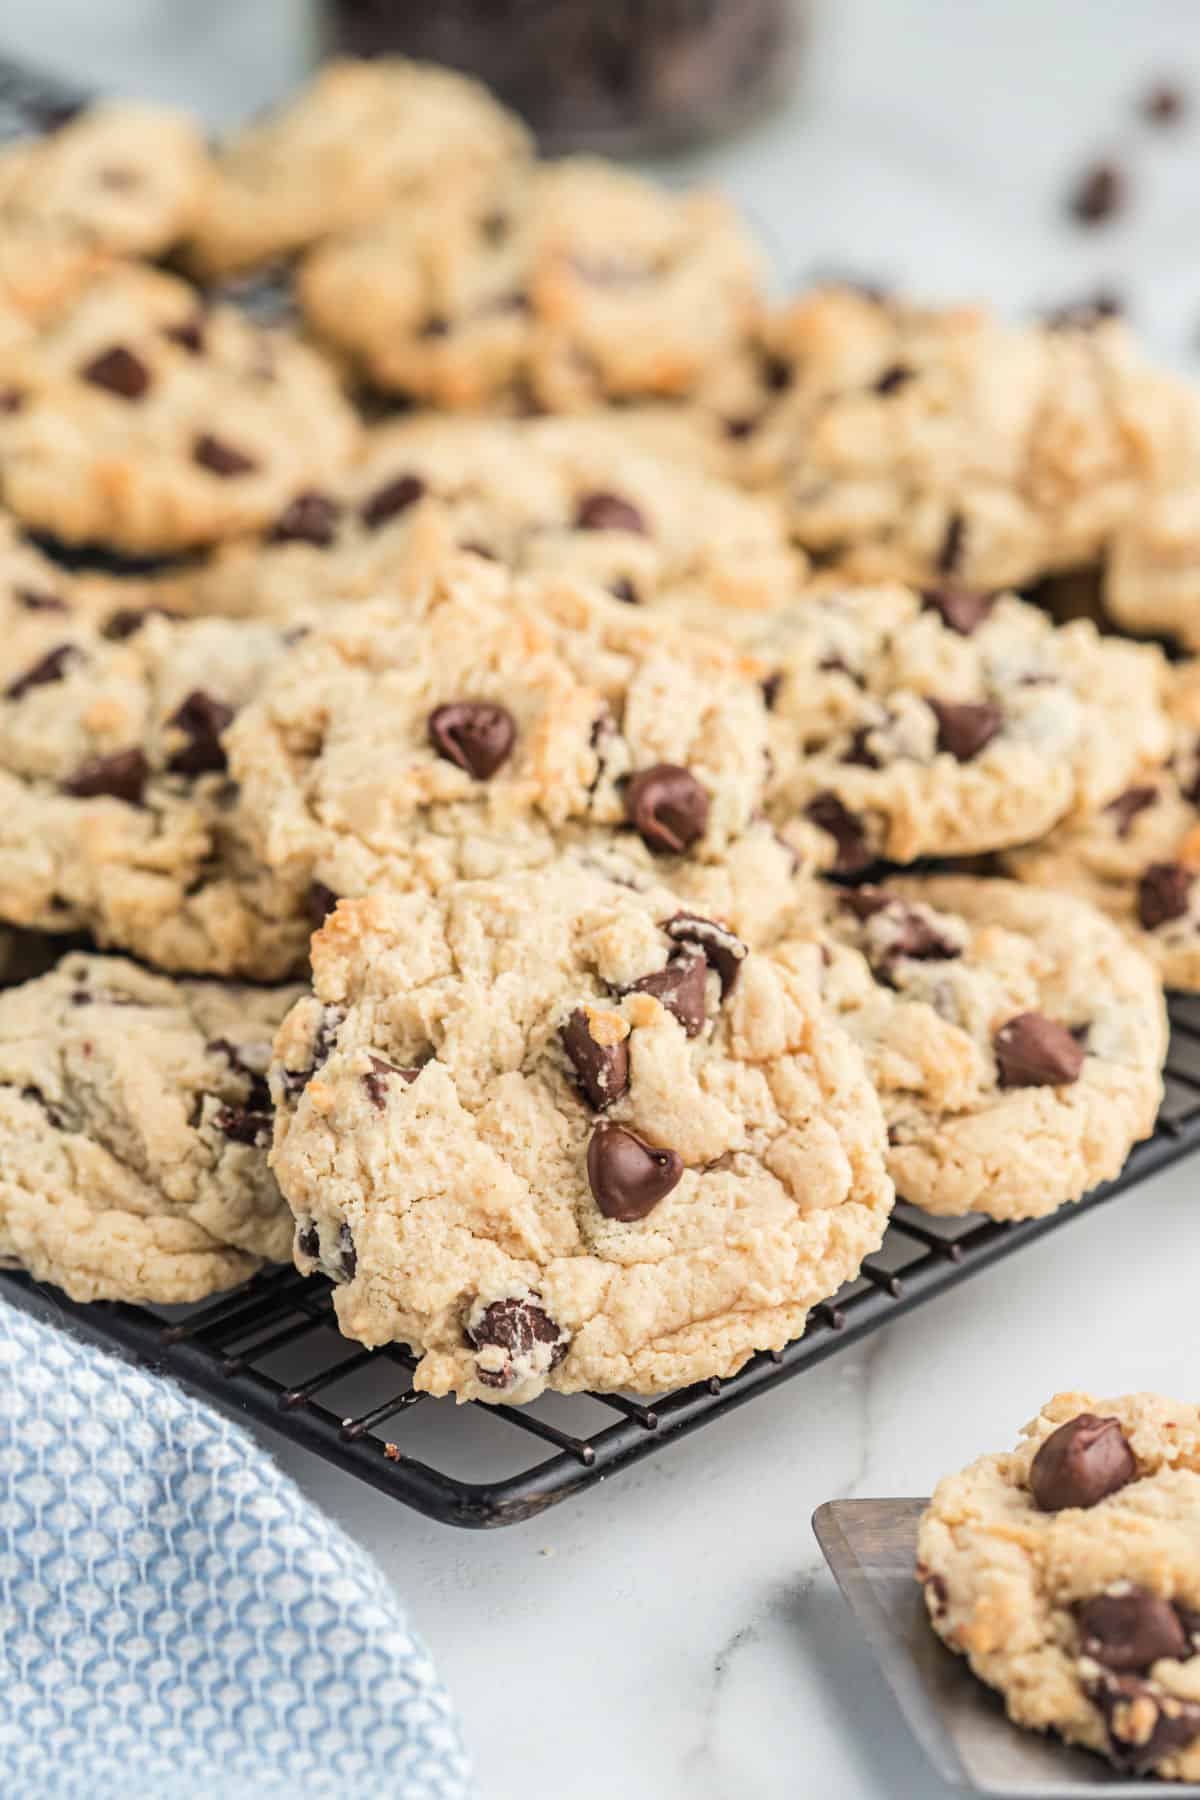 https://www.shugarysweets.com/wp-content/uploads/2020/02/soft-batch-chocolate-chip-cookies-stacked.jpg